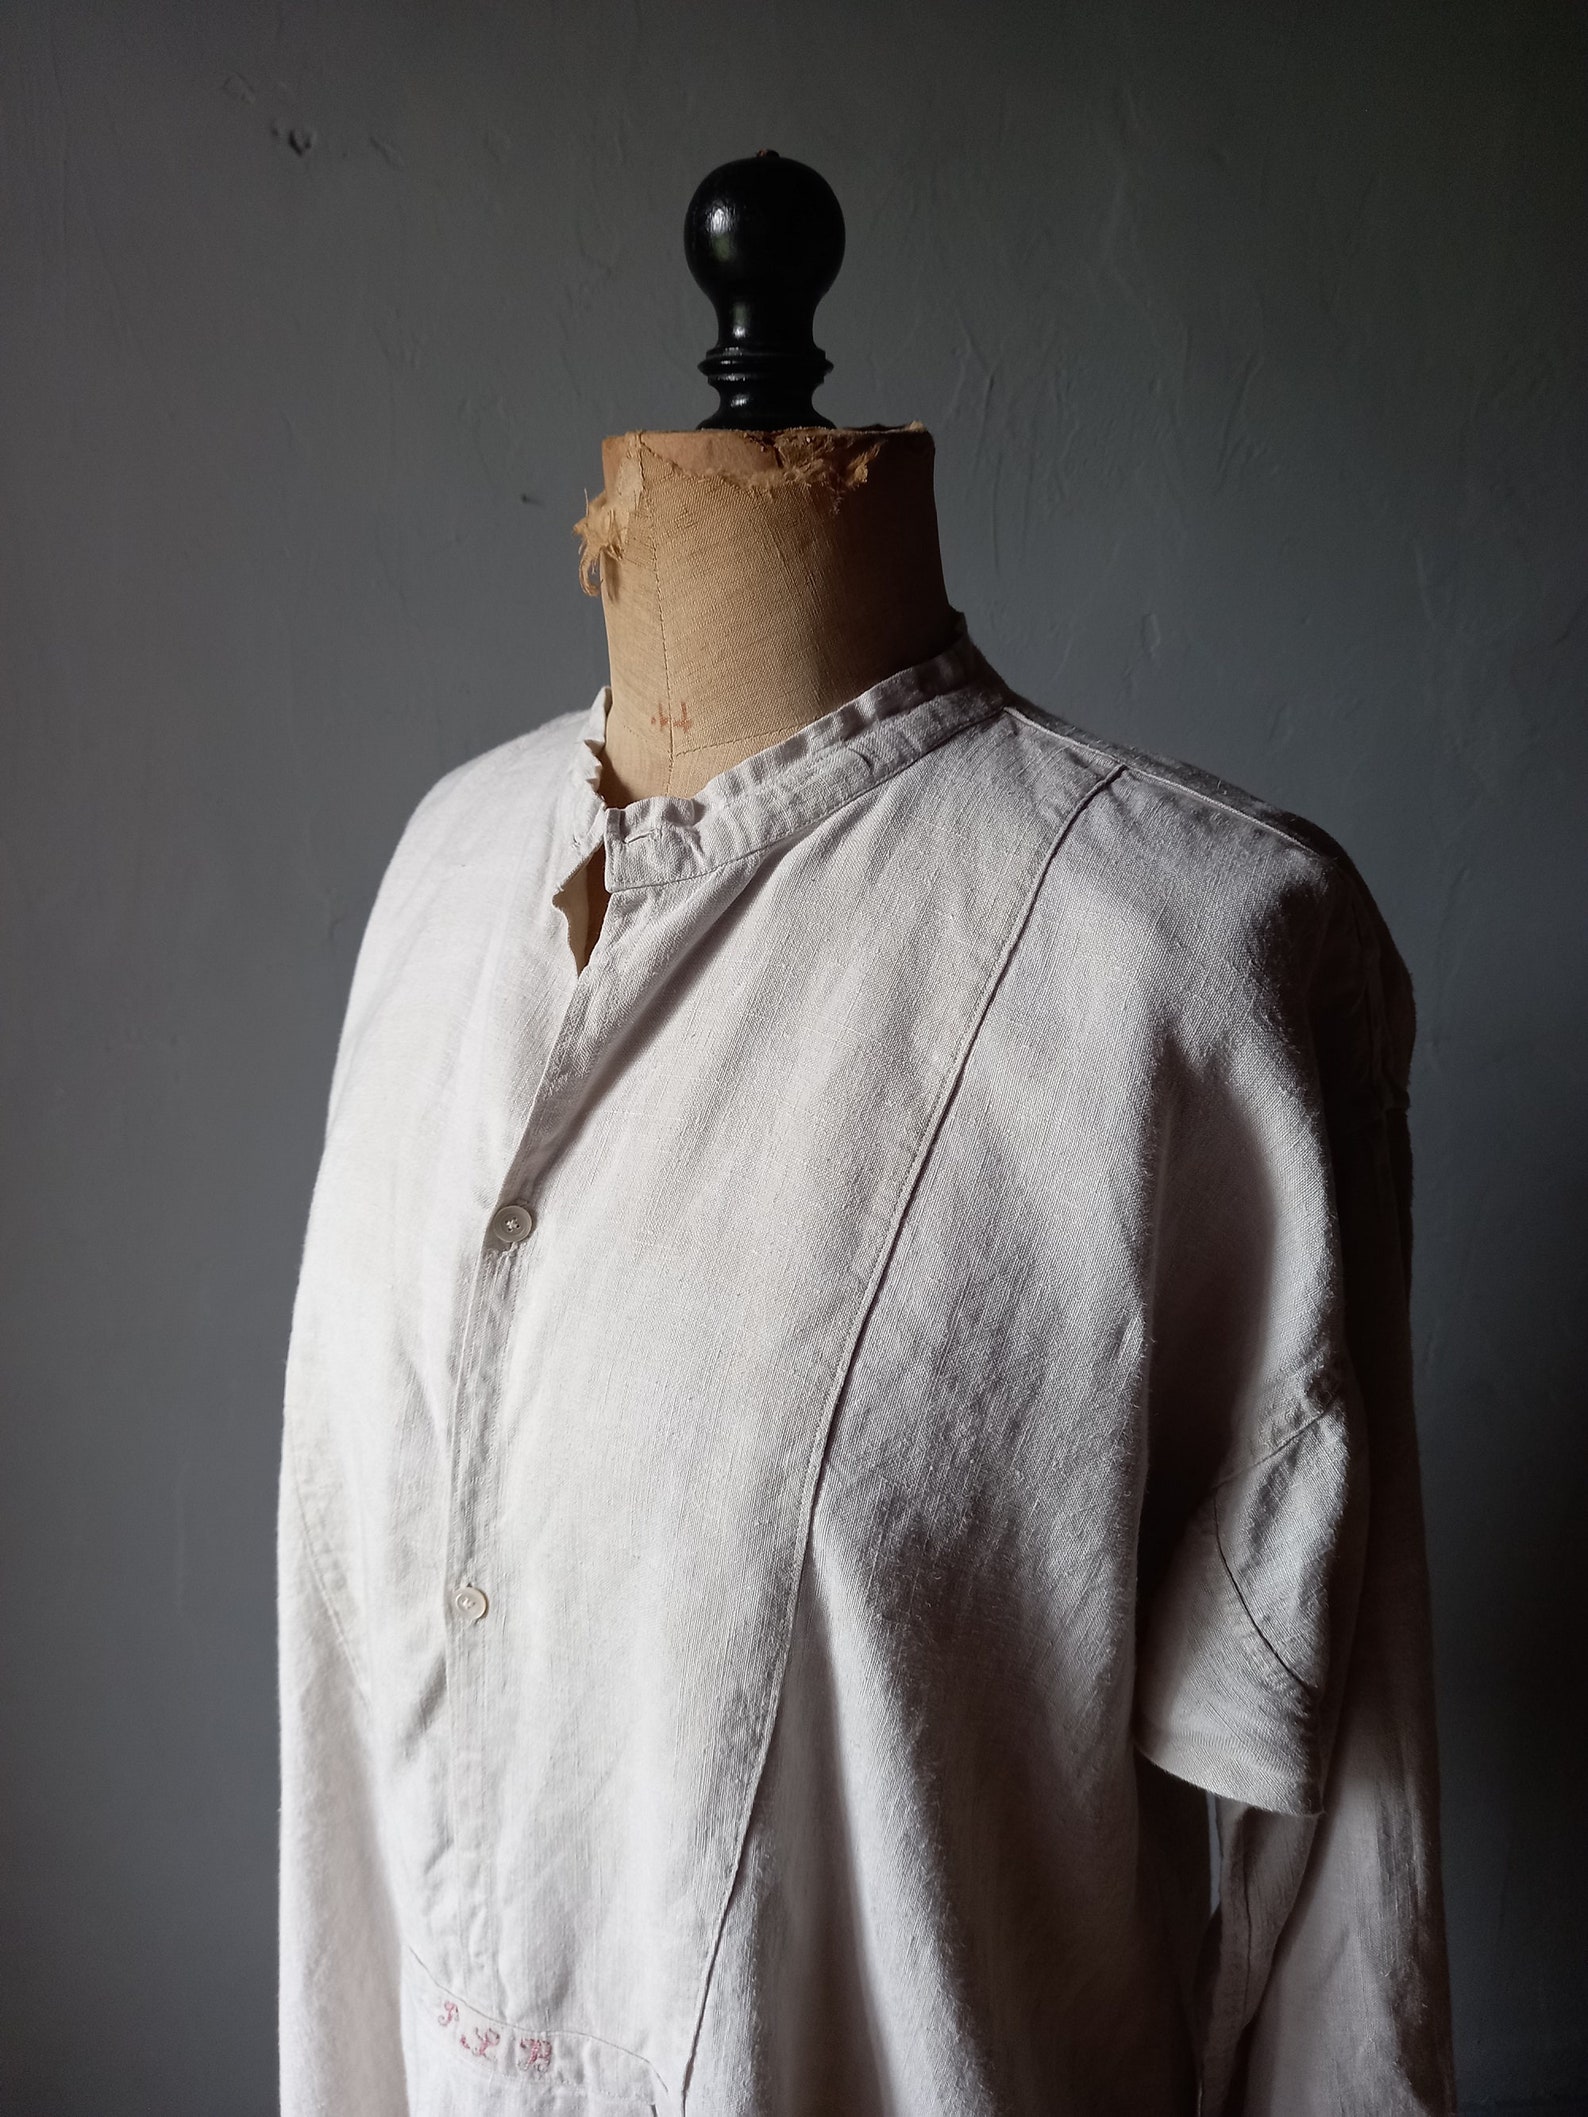 1800s Mens Clothing. 1800s Shirt. Costume. Victorian. Antique - Etsy